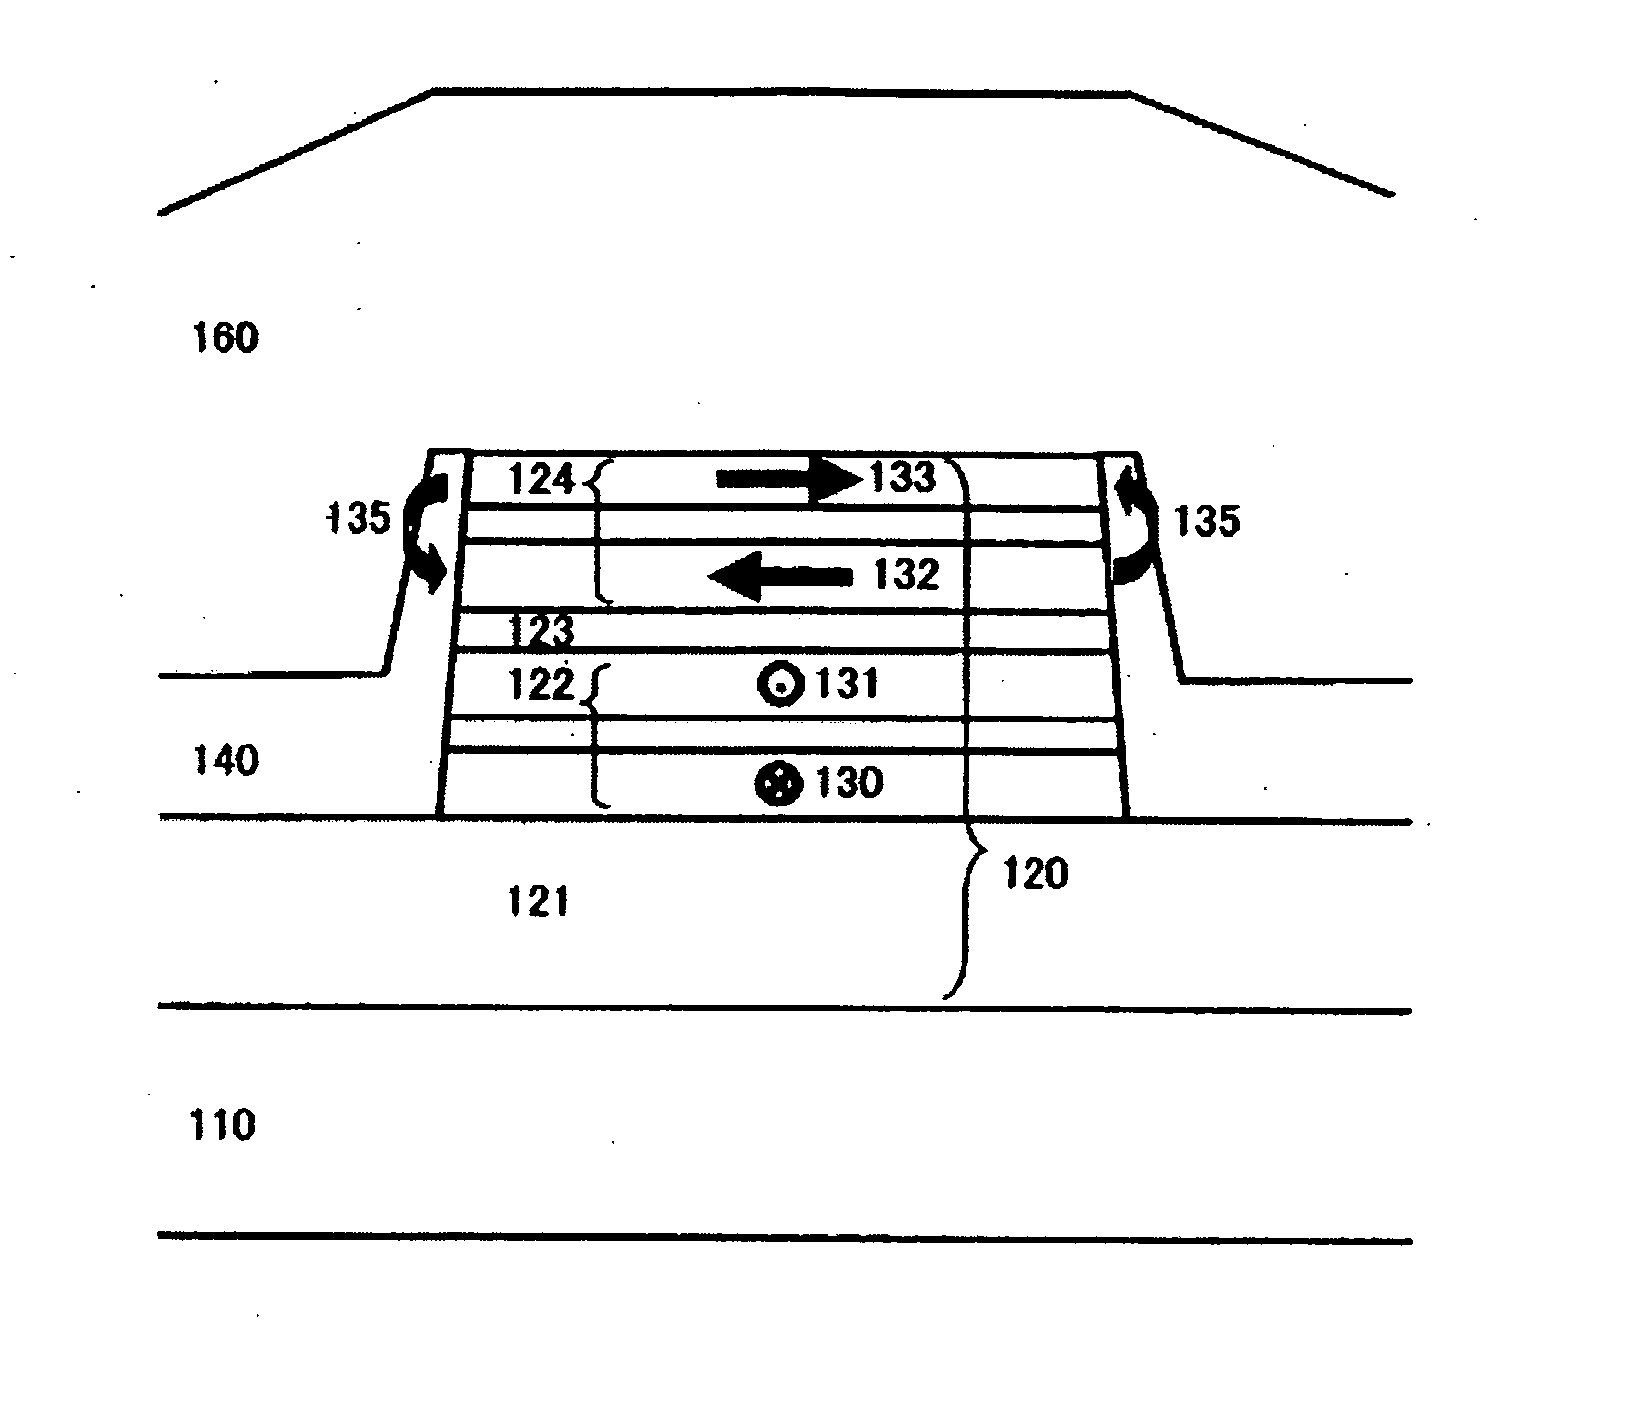 Magneto-resistive head having a stable response property without longitudinal biasing and method for manufacturing the same